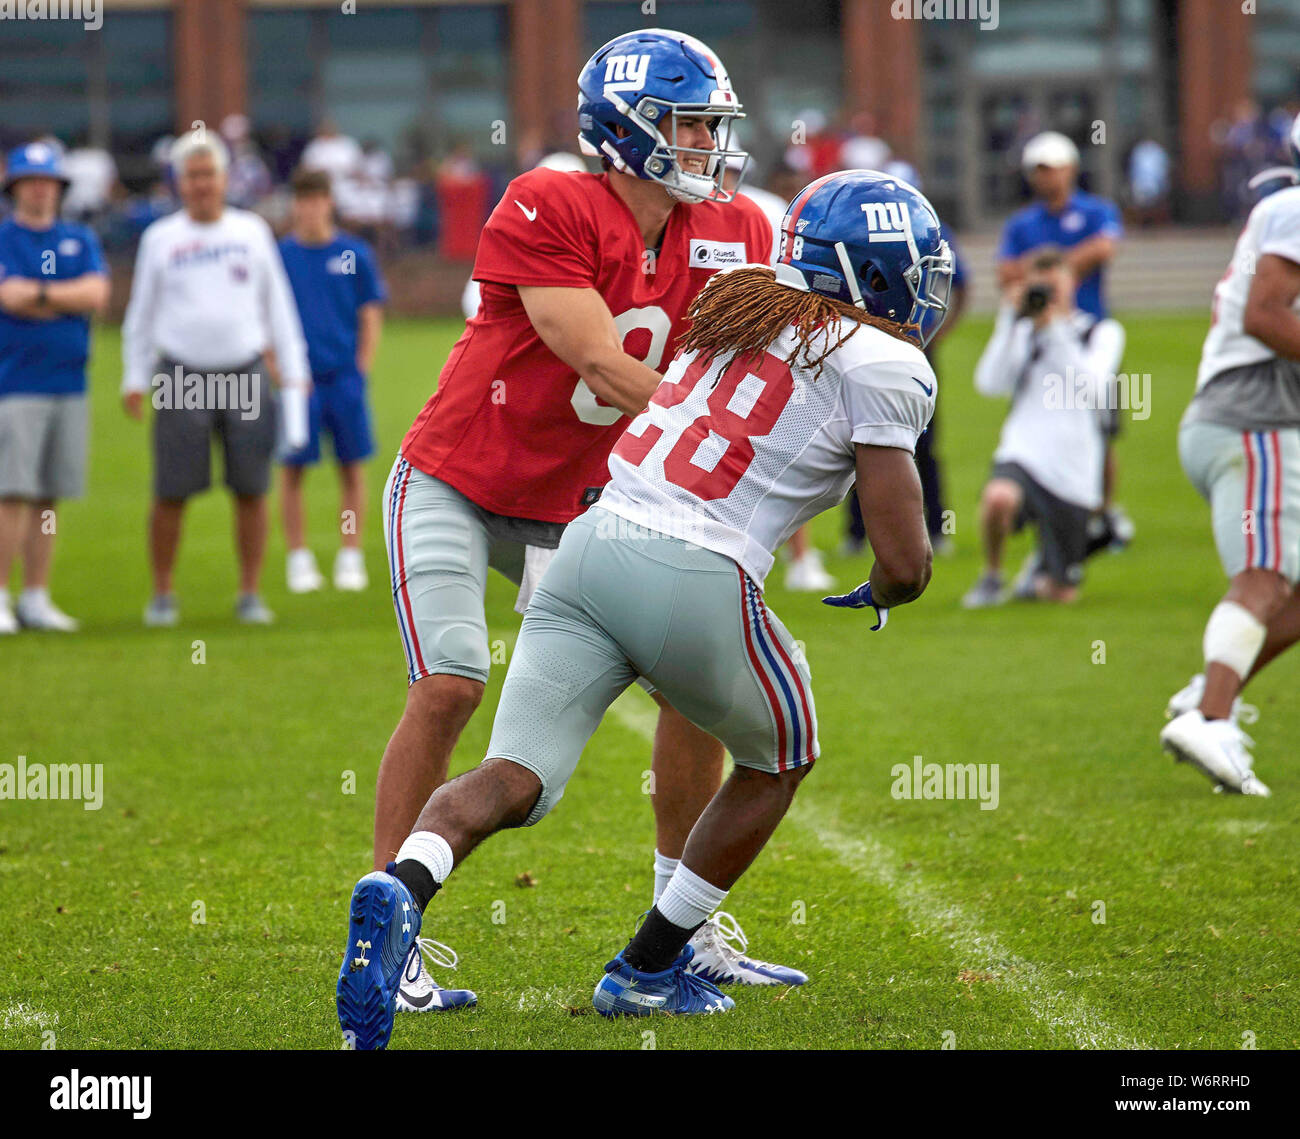 East Rutherford, New Jersey, USA. 02nd Aug, 2019. New York Giants quarterback Daniel Jones (8) hands off to running back Paul Perkins (28) during training camp at the Quest Diagnostics Training Center in East Rutherford, New Jersey. Duncan Williams/CSM Credit: Cal Sport Media/Alamy Live News Stock Photo